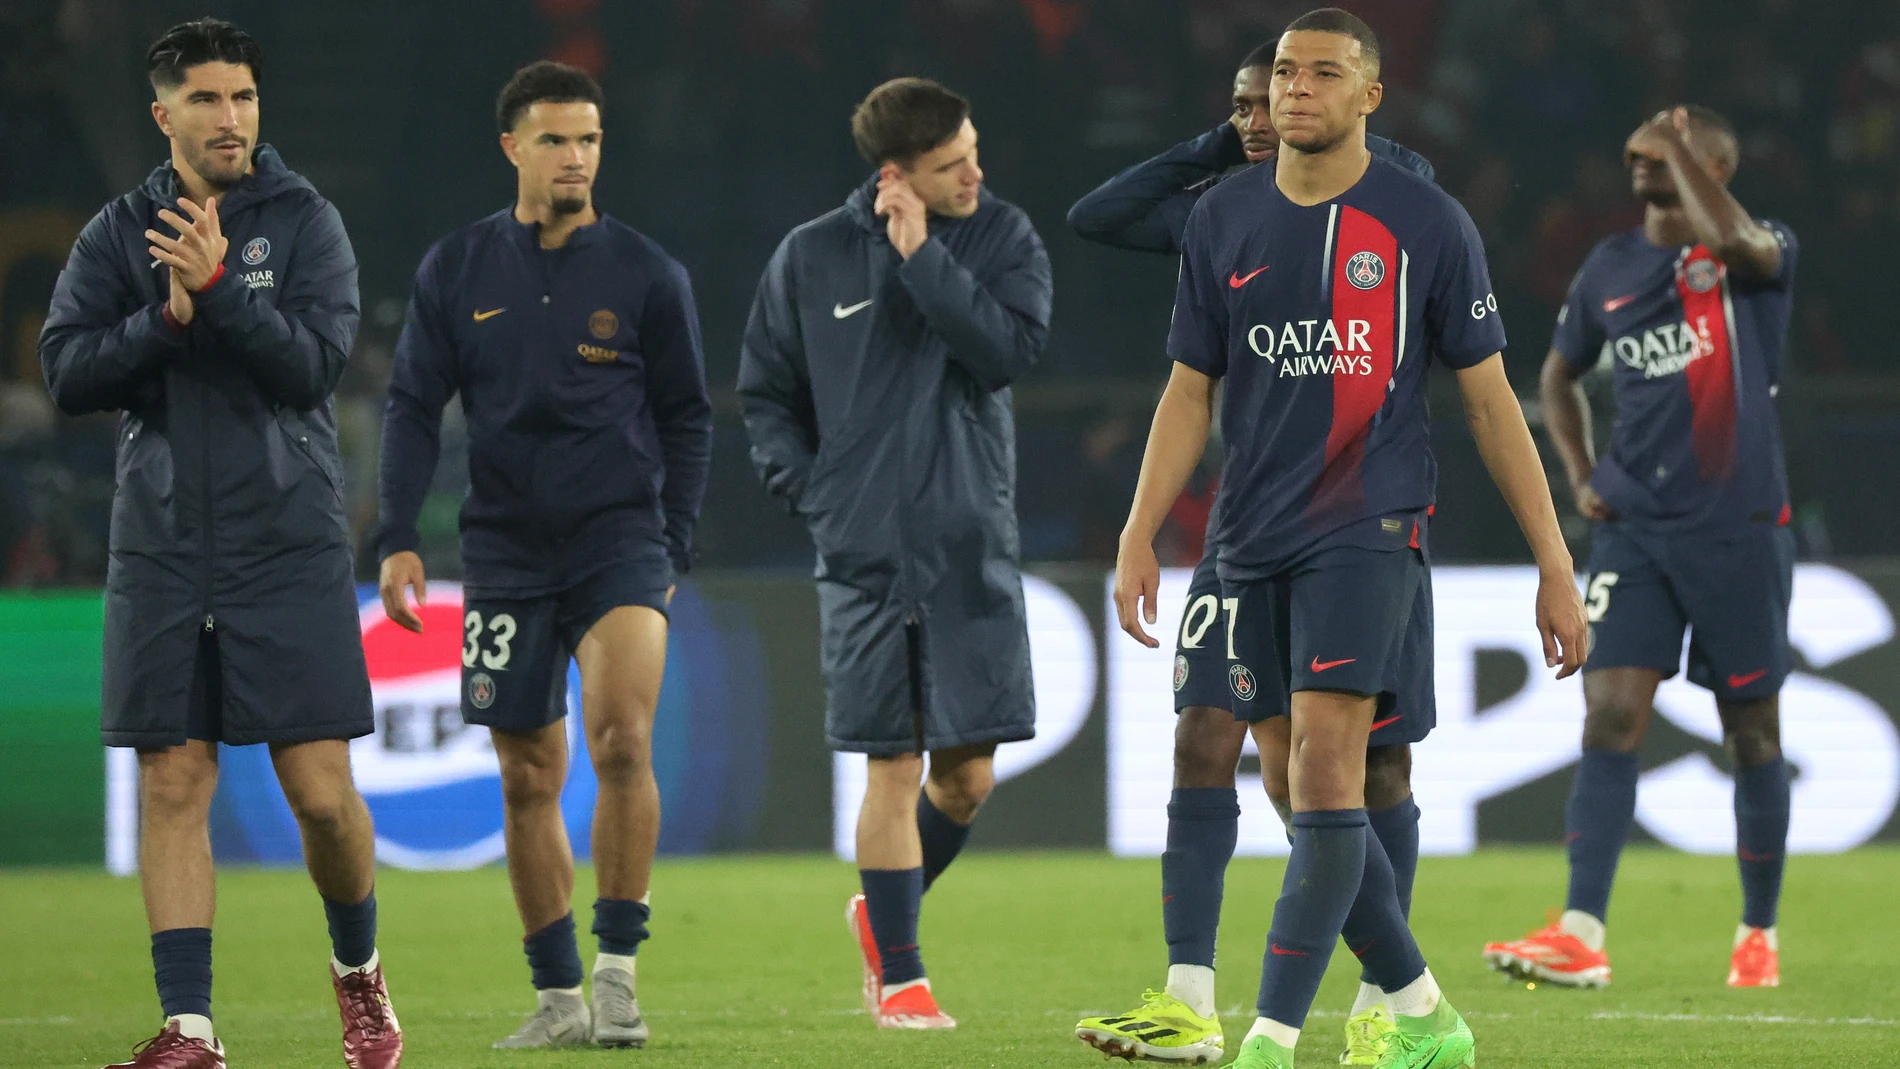 Paris (France), 07/05/2024.- Kylian Mbappe of PSG and teammates look on after the UEFA Champions League semi-finals, 2nd leg soccer match of Paris Saint-Germain against Borussia Dortmund, in Paris, France, 07 May 2024. PSG lost the match 0-1 and the tie 0-2 on aggregate with Borussia Dortmund advancing to the final. (Liga de Campeones, Francia, Rusia) EFE/EPA/TERESA SUAREZ 